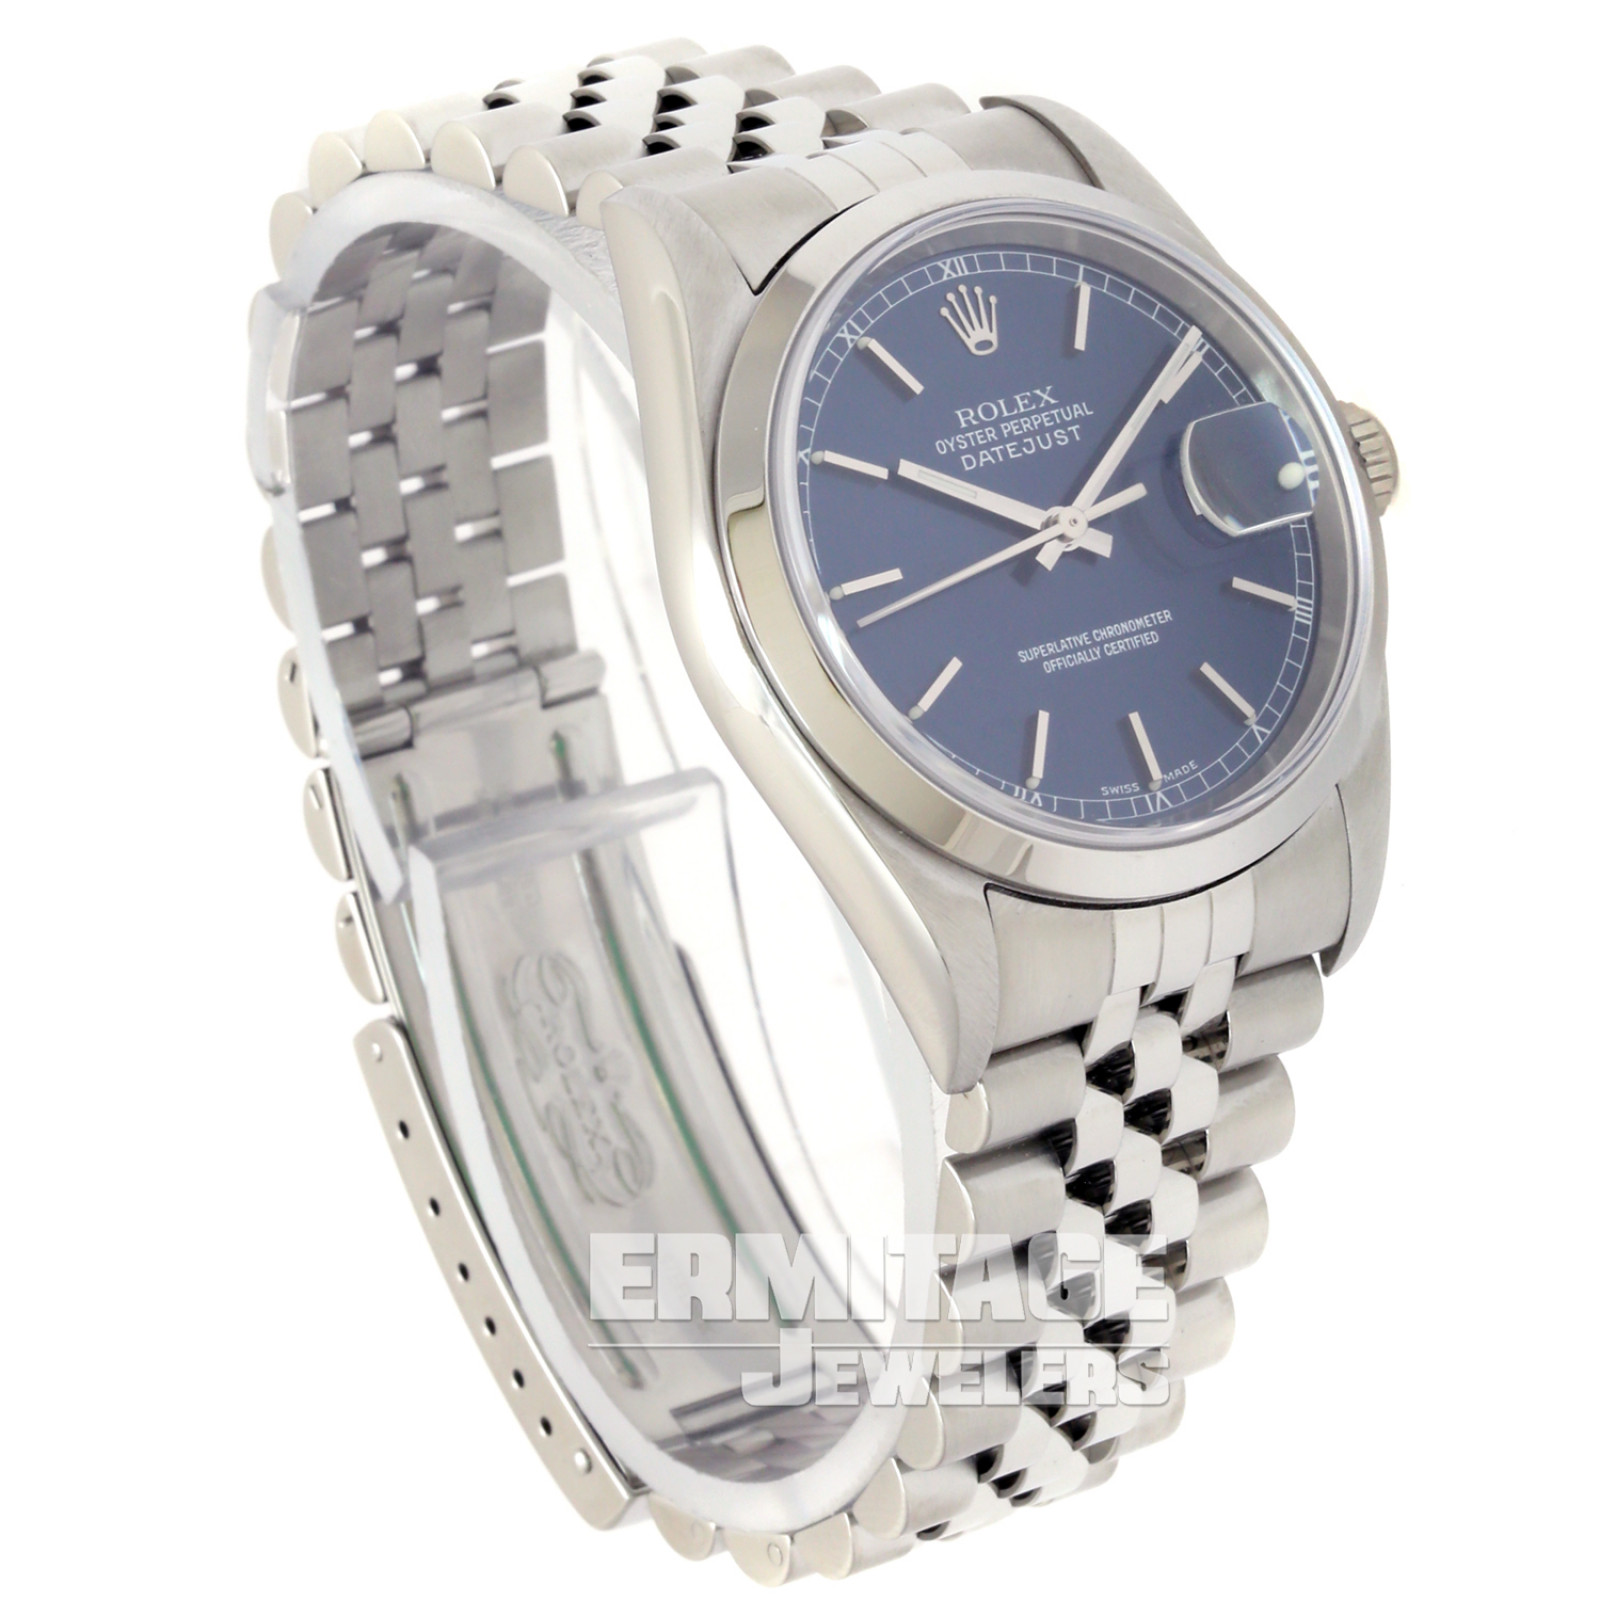 Rolex Datejust 16200 with Blue Dial